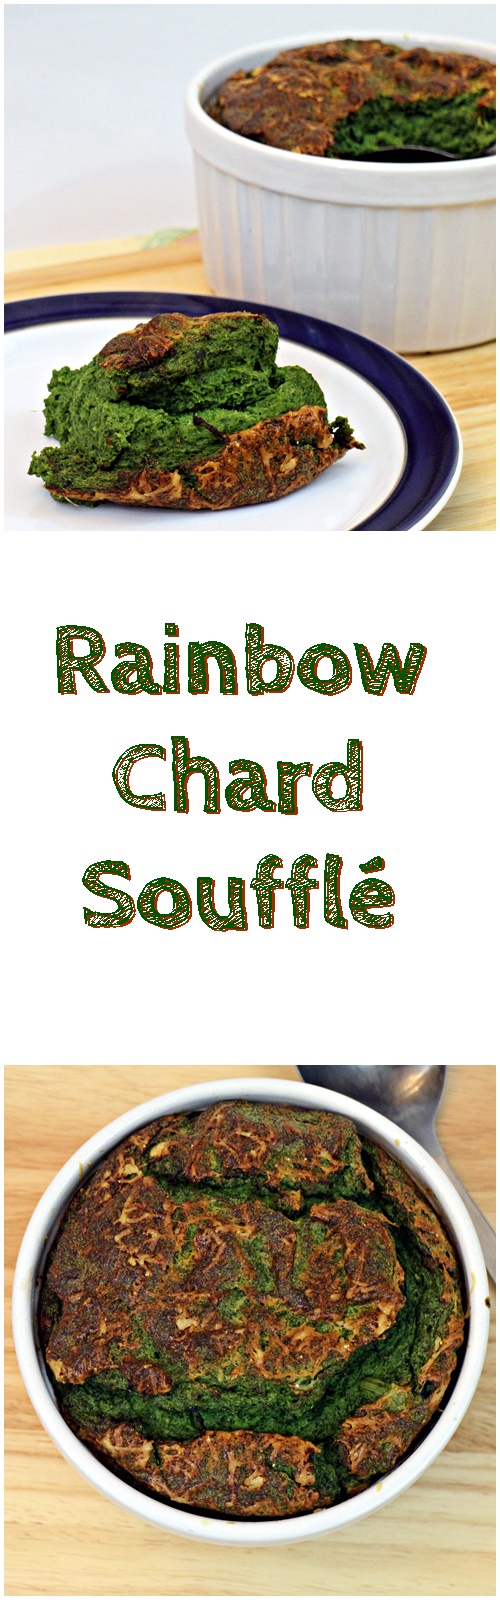 Rainbow Chard Soufflé, cheesy and delicious! Fab Food 4 All